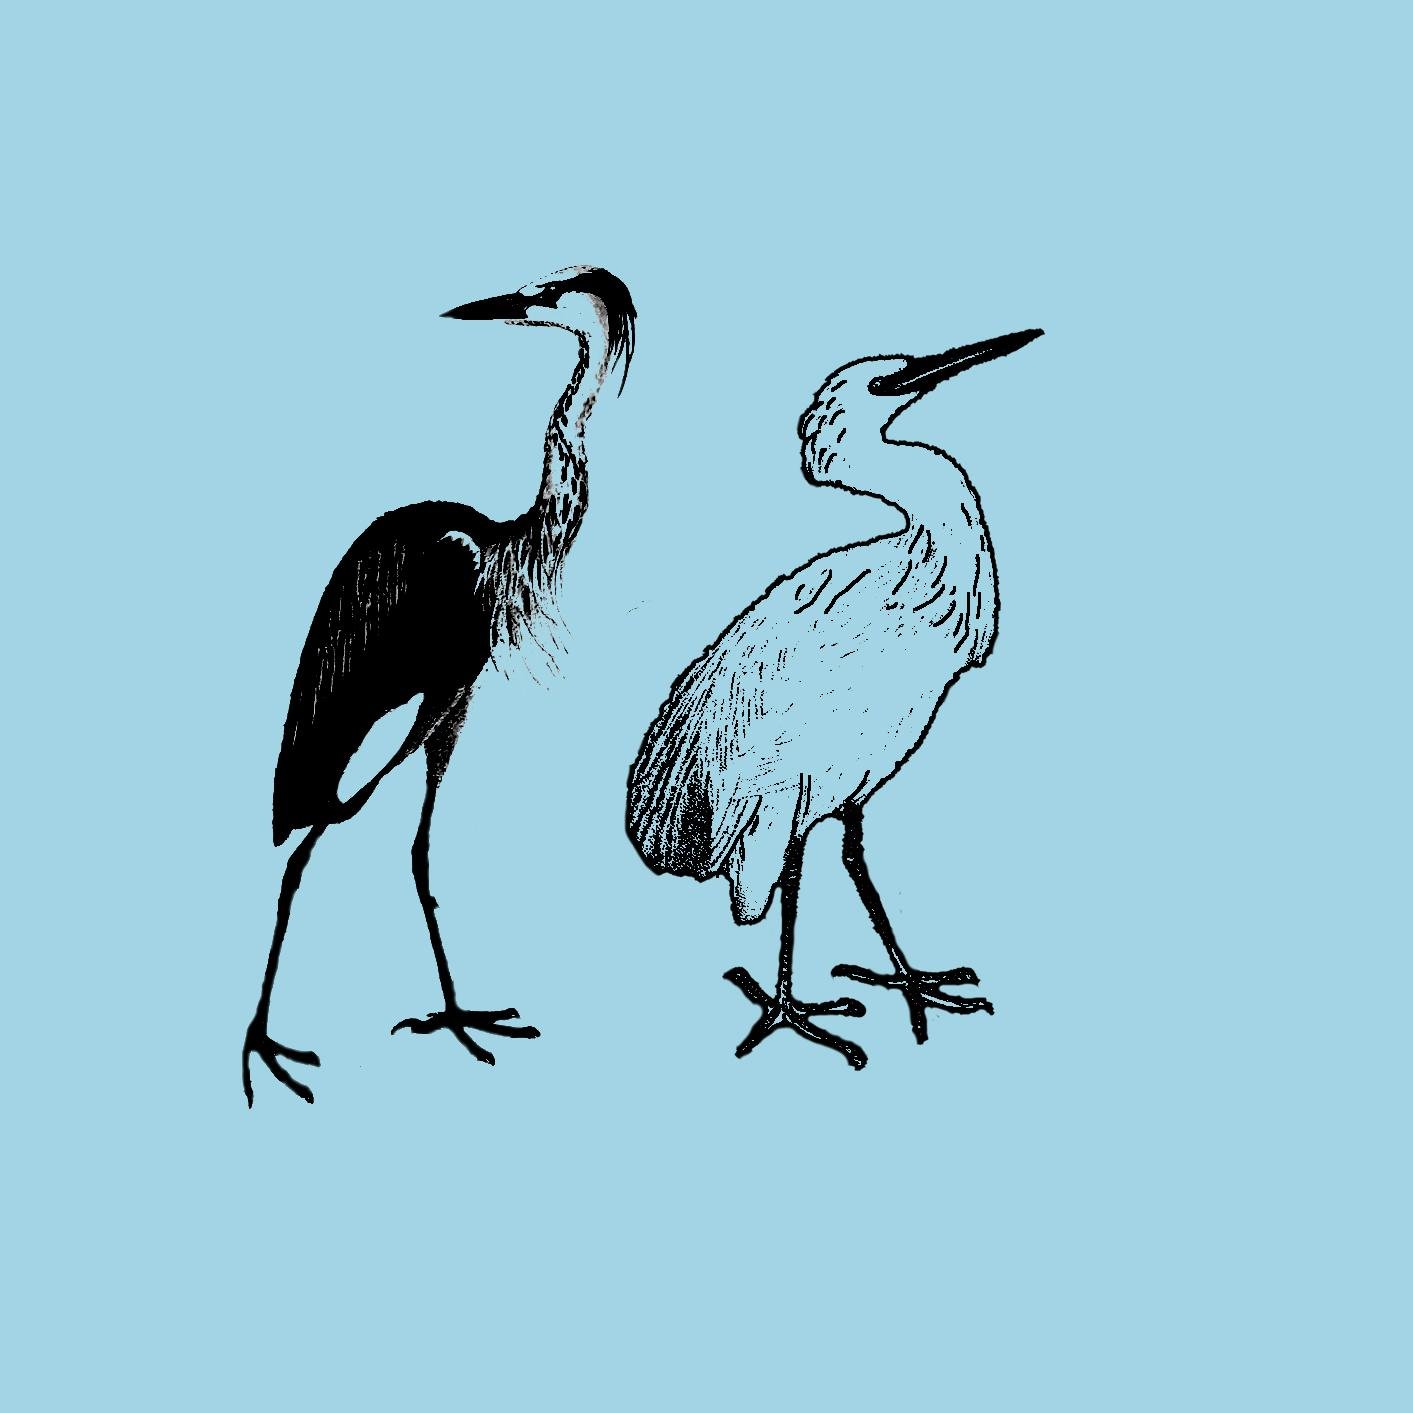 Heron & Crane are a psych-folk-instrumental duo from Charlottesville, VA and Columbus, OH. https://t.co/LtAJ3DJXcD